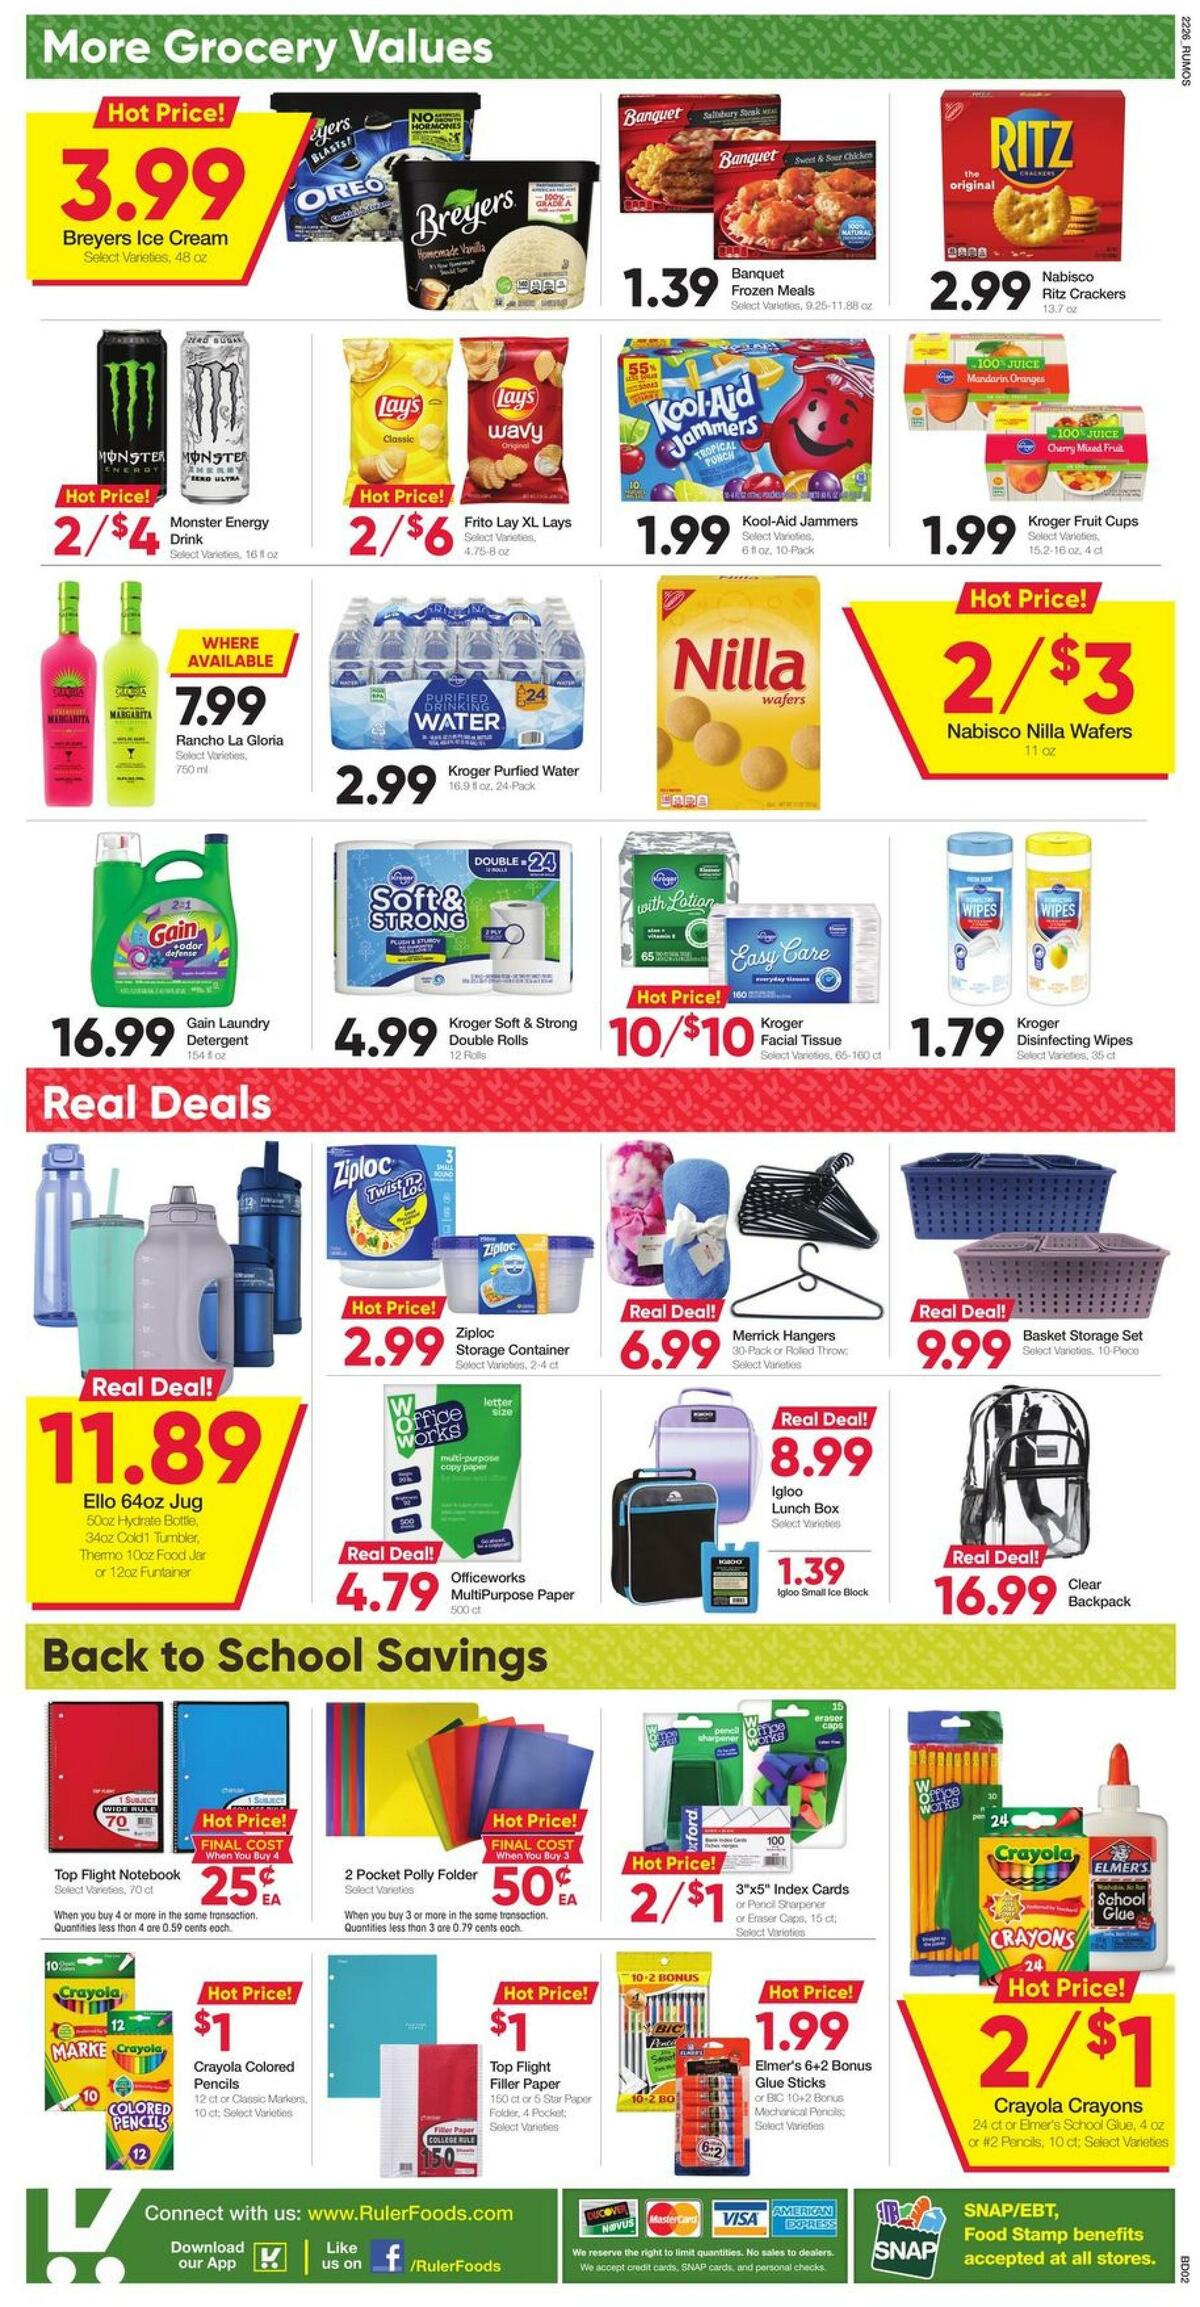 Ruler Foods Weekly Ad from July 27